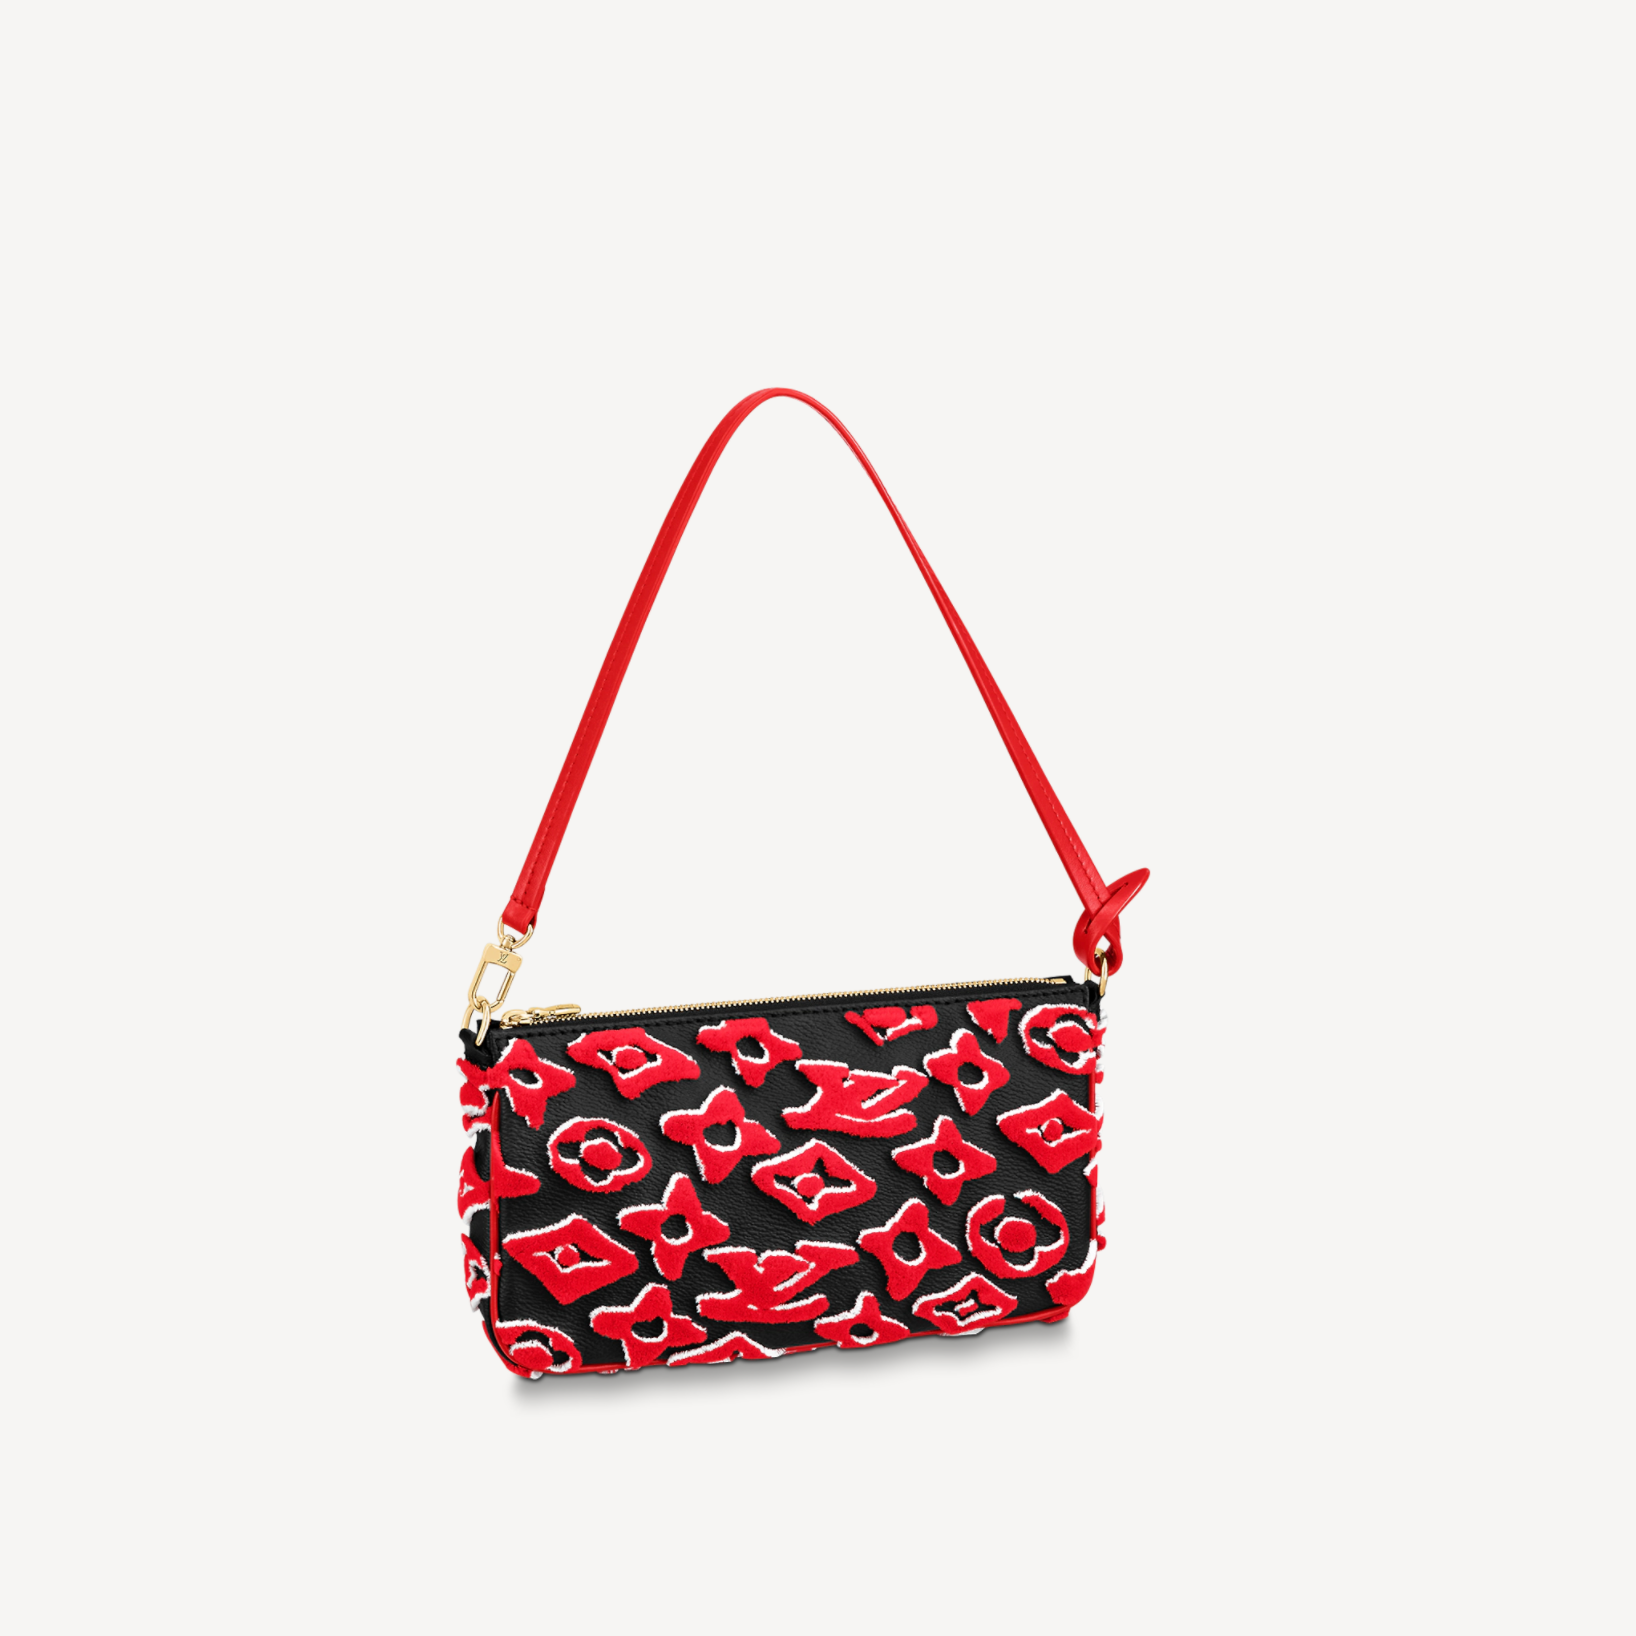 Louis Vuitton x UF Tufted Monogram Neverfull mm in Black and Red Tote